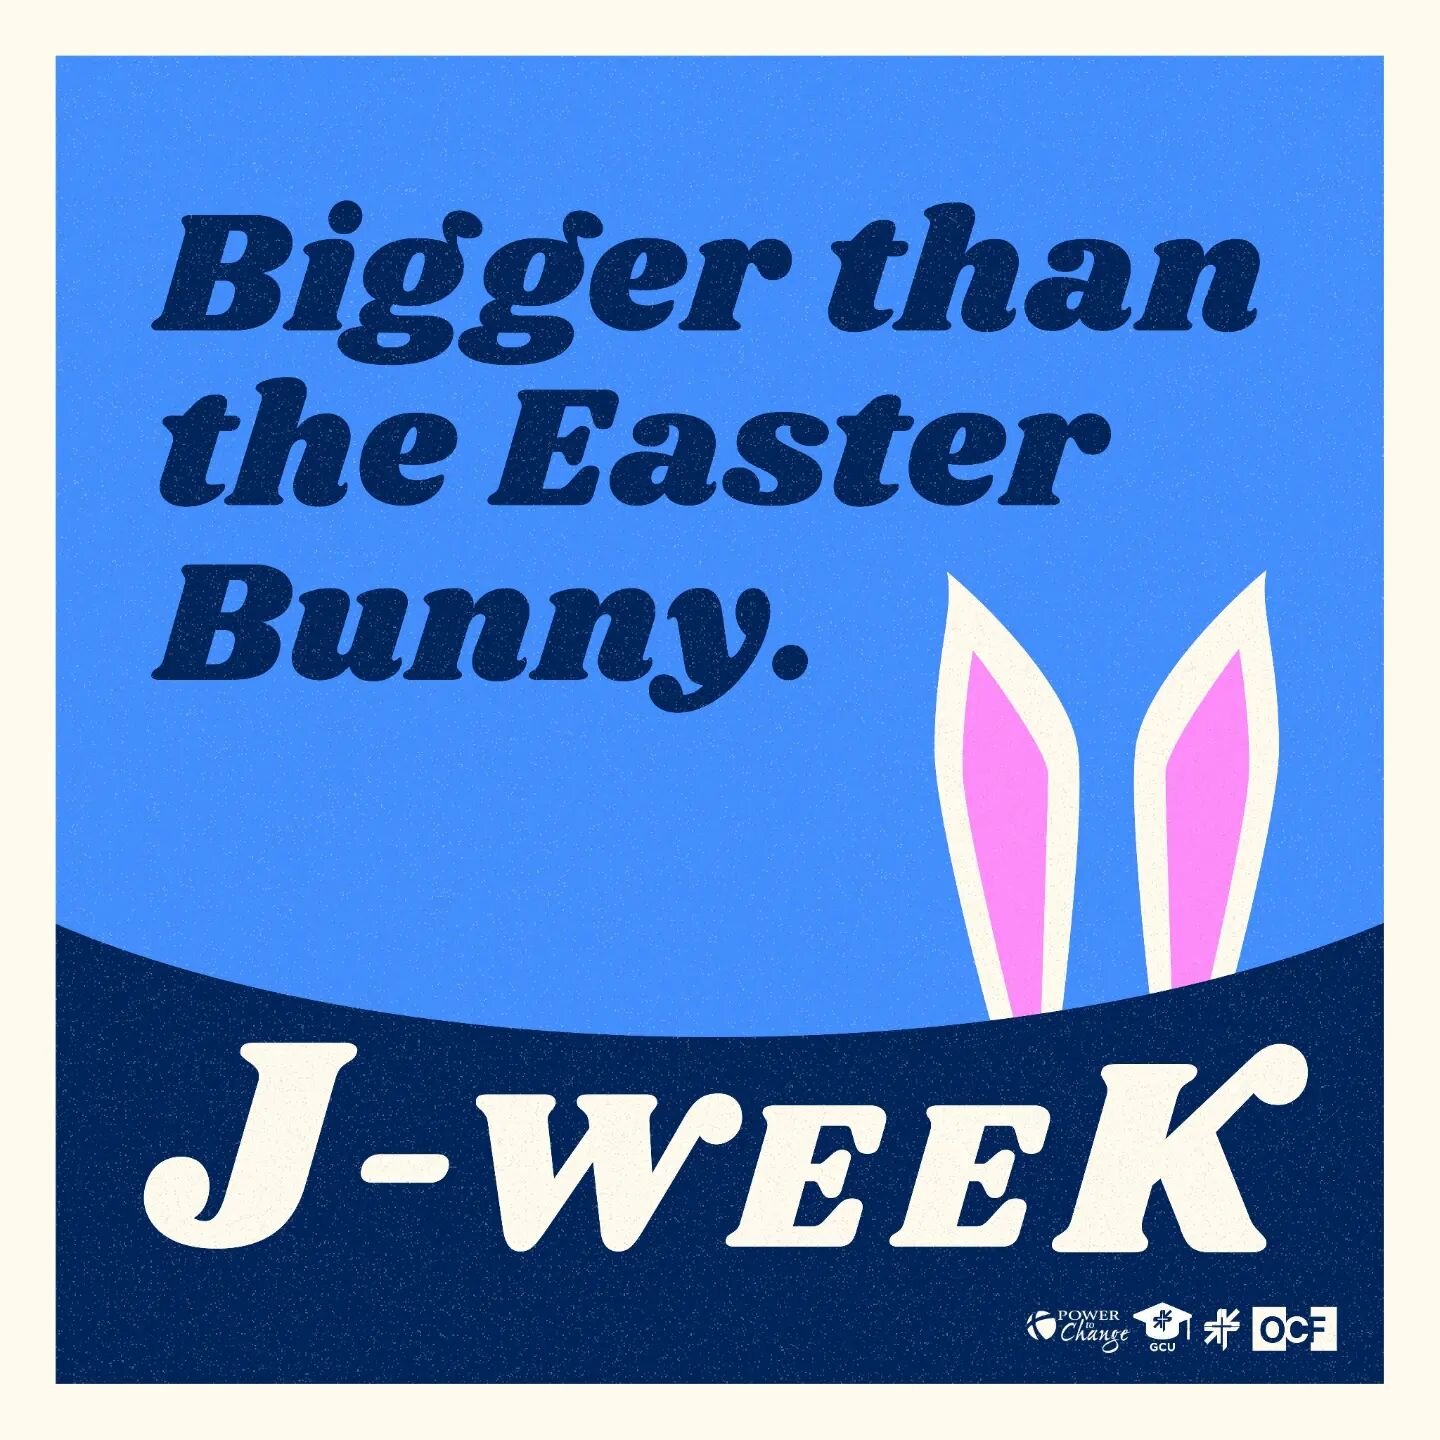 🙏 J-WEEK 💠

It's bigger than the Easter bunny🐇 It means more than the Easter eggs 🥚

 It's Jesus Week! 🎉

Come find out more about what we'll be doing for J-Week this year! 💙